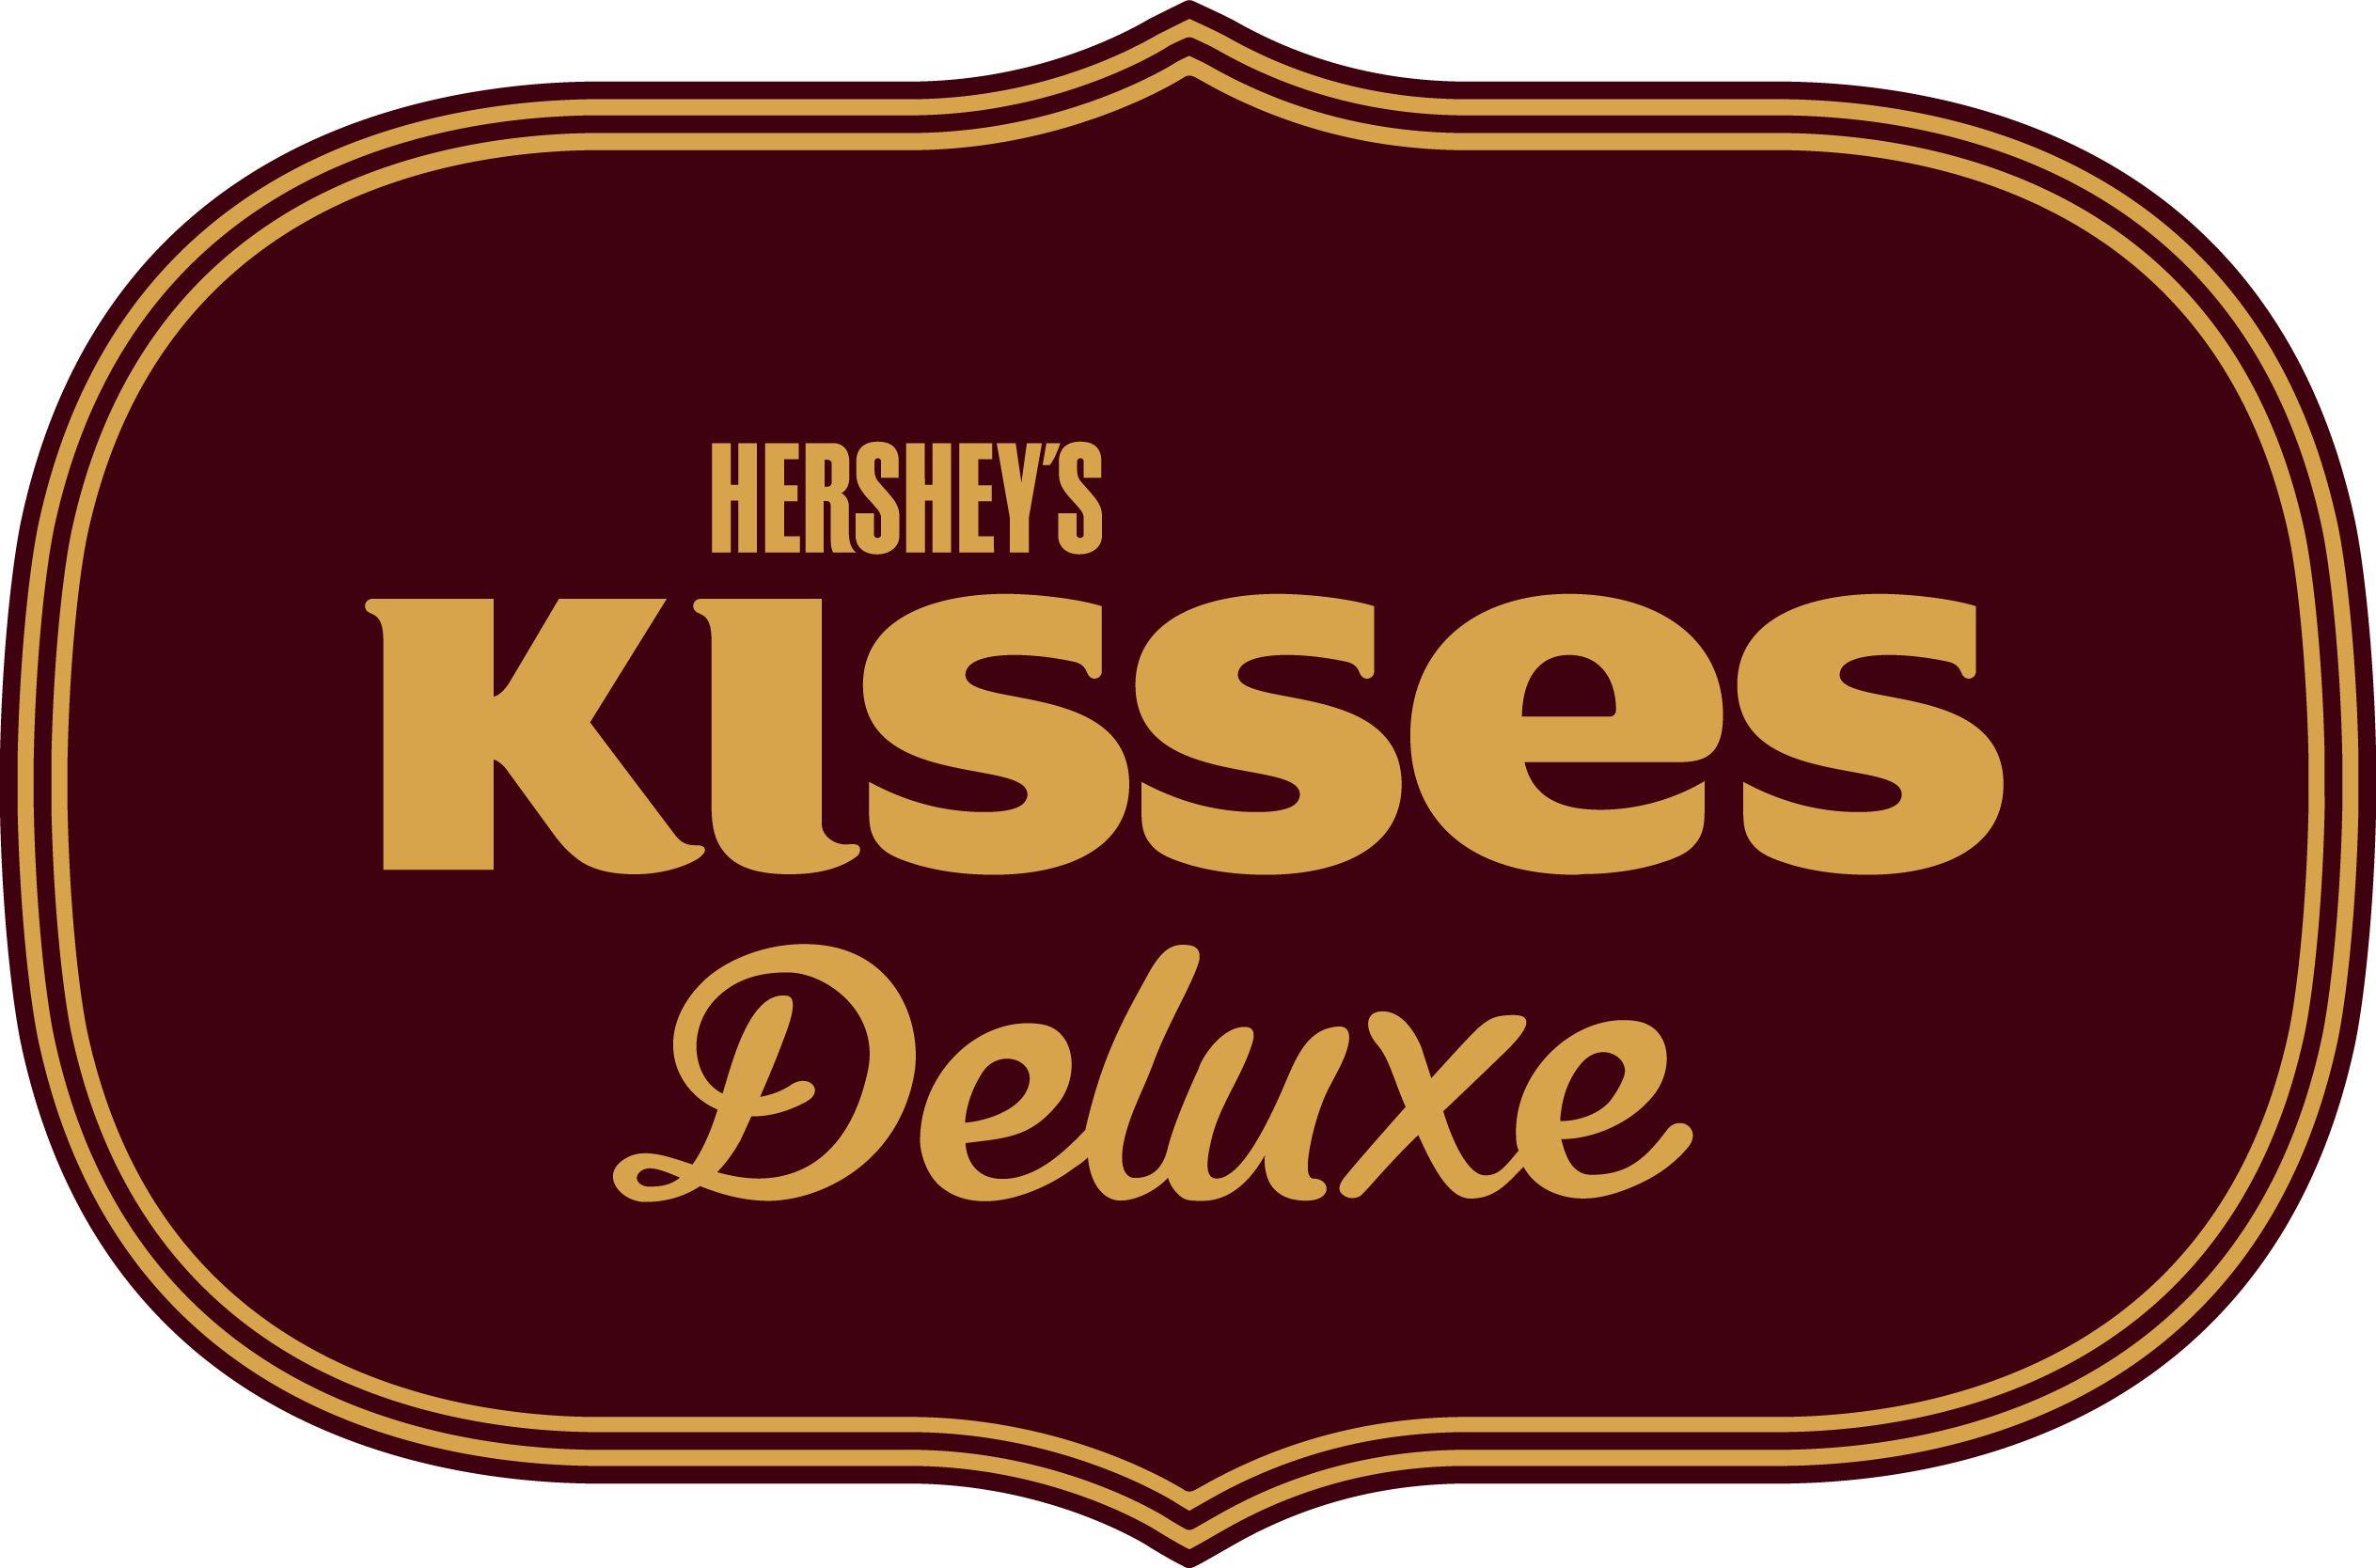 Hershey Kisses Logo - HERSHEY'S KISSES DELUXE Chocolates Help Consumers “Say More” This ...